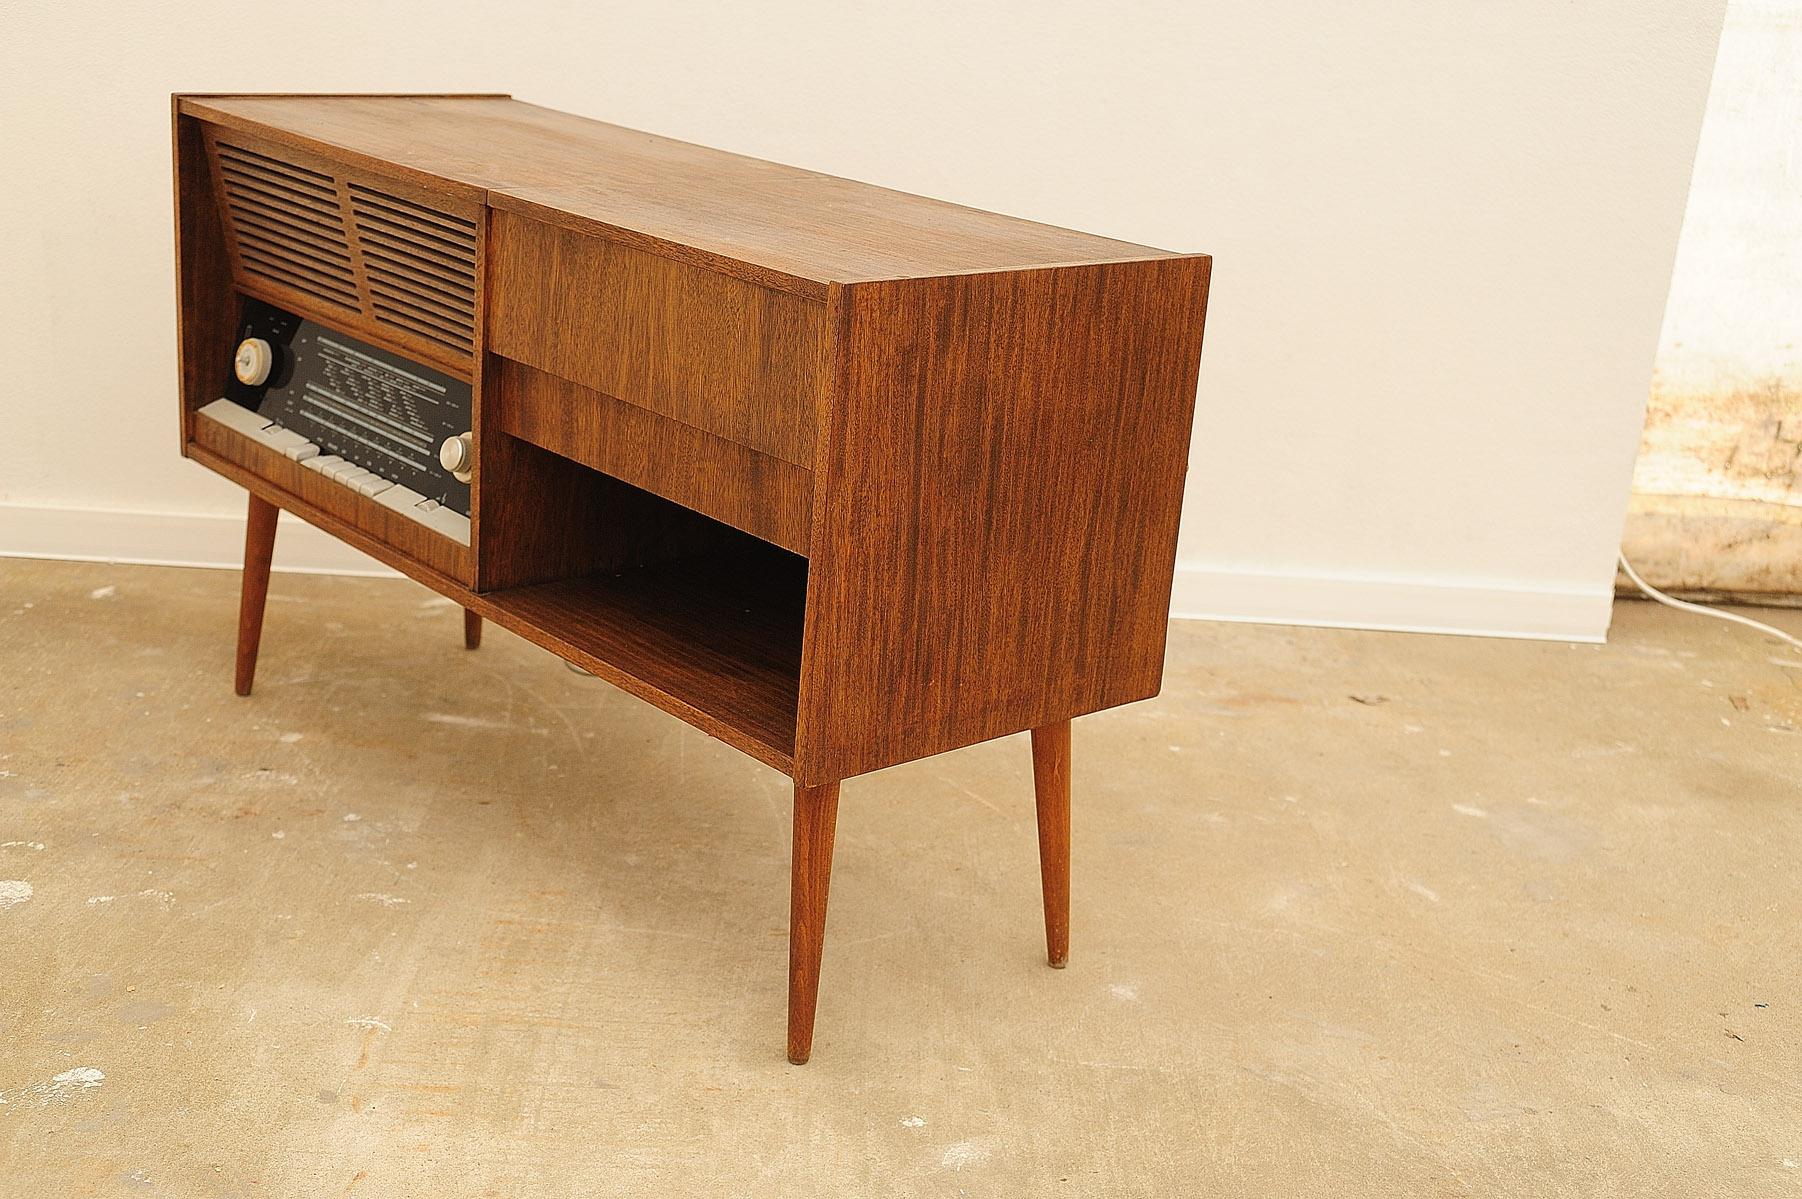 Mid century cabinet with build-in turntable and radio, it was made in the former Czechoslovakia in the 1950´s. The construction is made of wood in a walnut veneer. The Gramophone and radio are functional.
Inside the cabinet are also storage